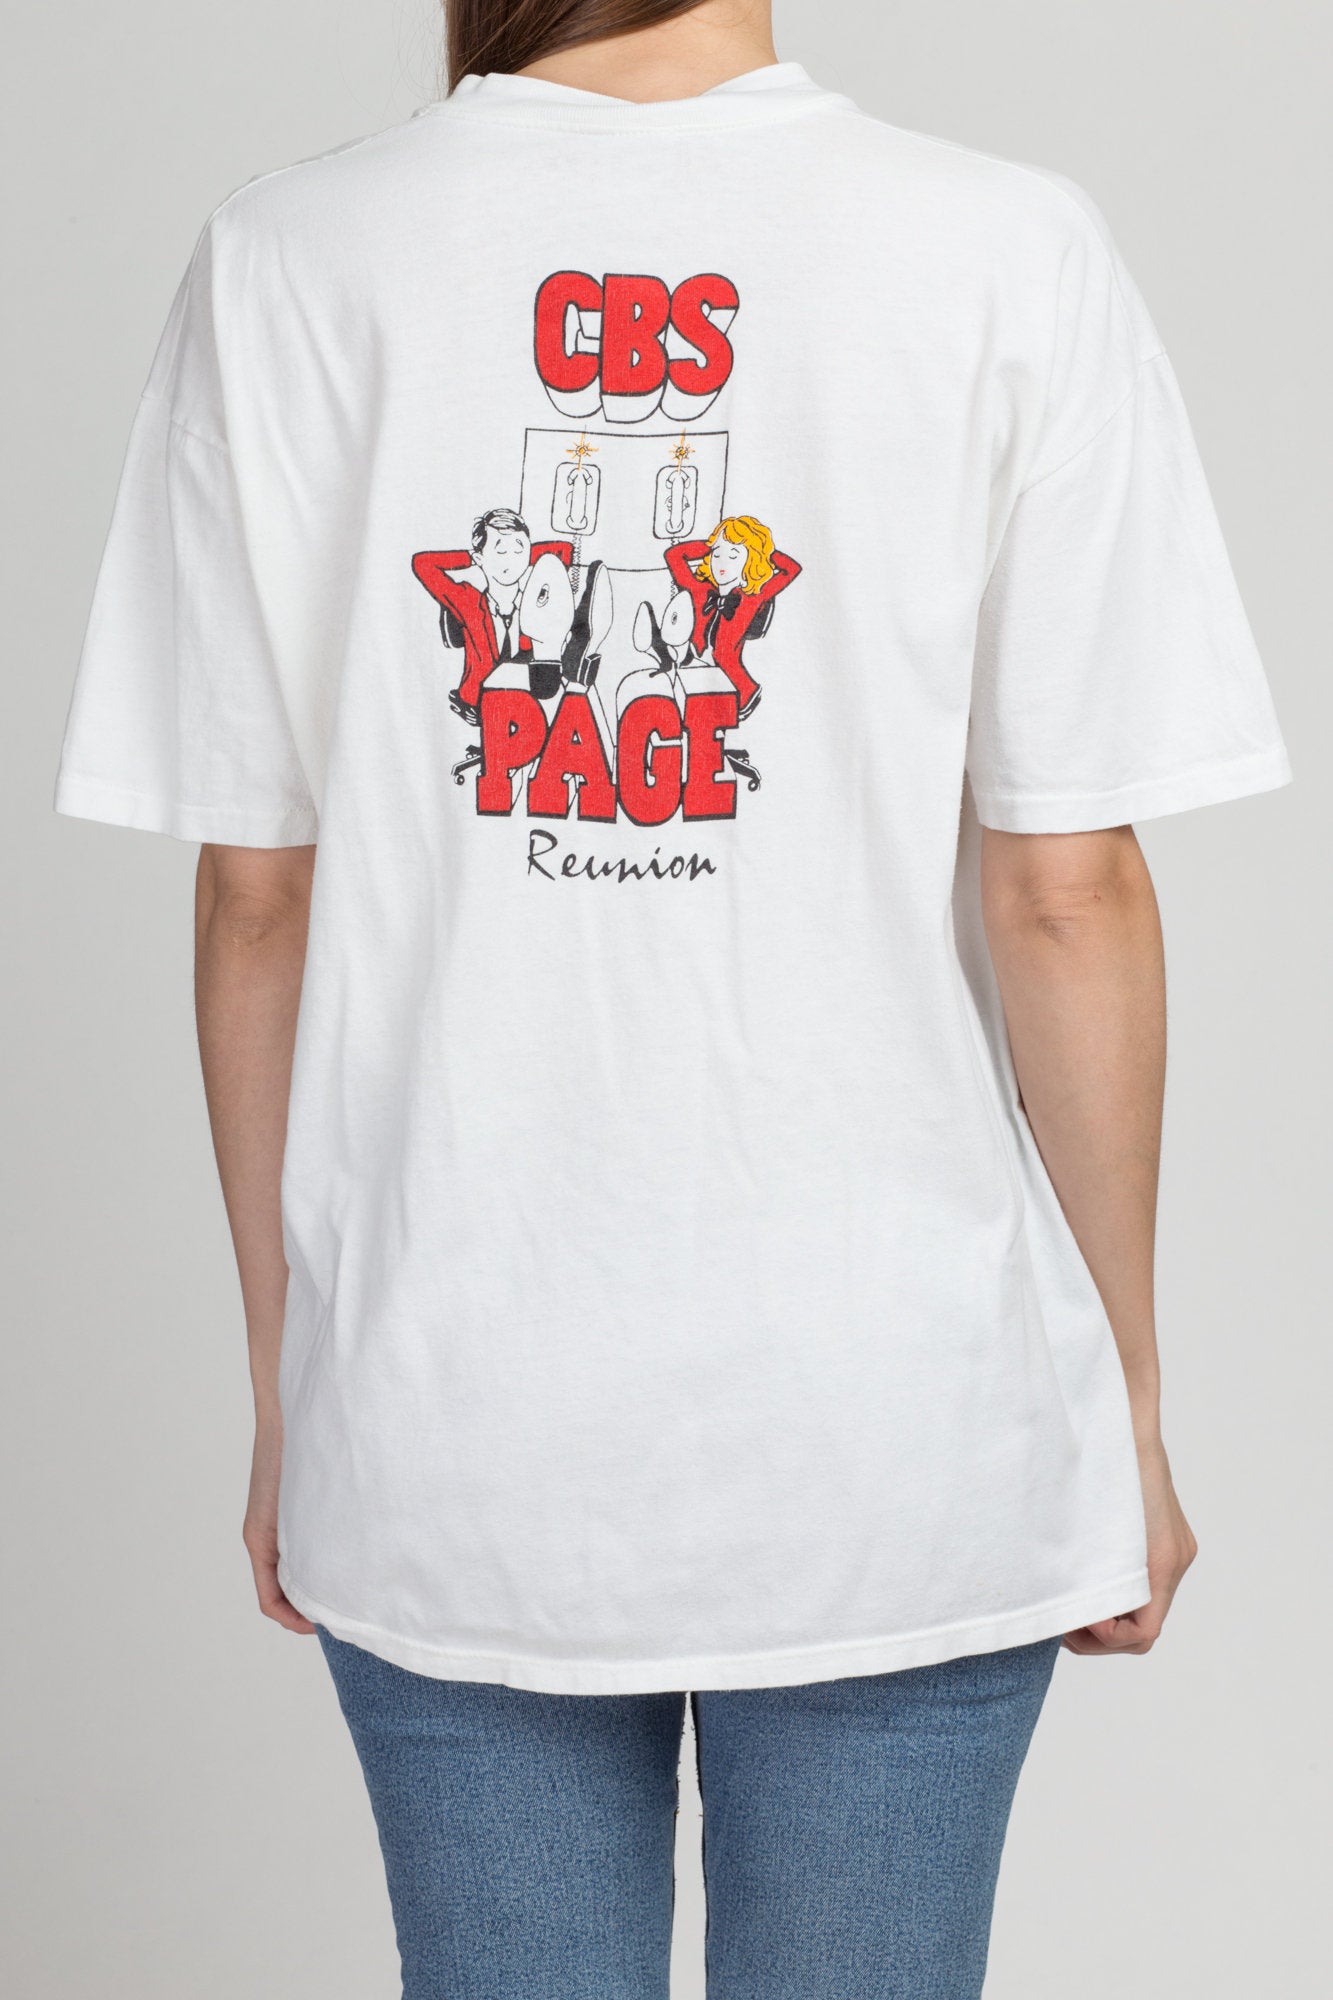 1989 CBS Page Reunion T Shirt - Extra Large | Vintage Funny Graphic TV Station Tee